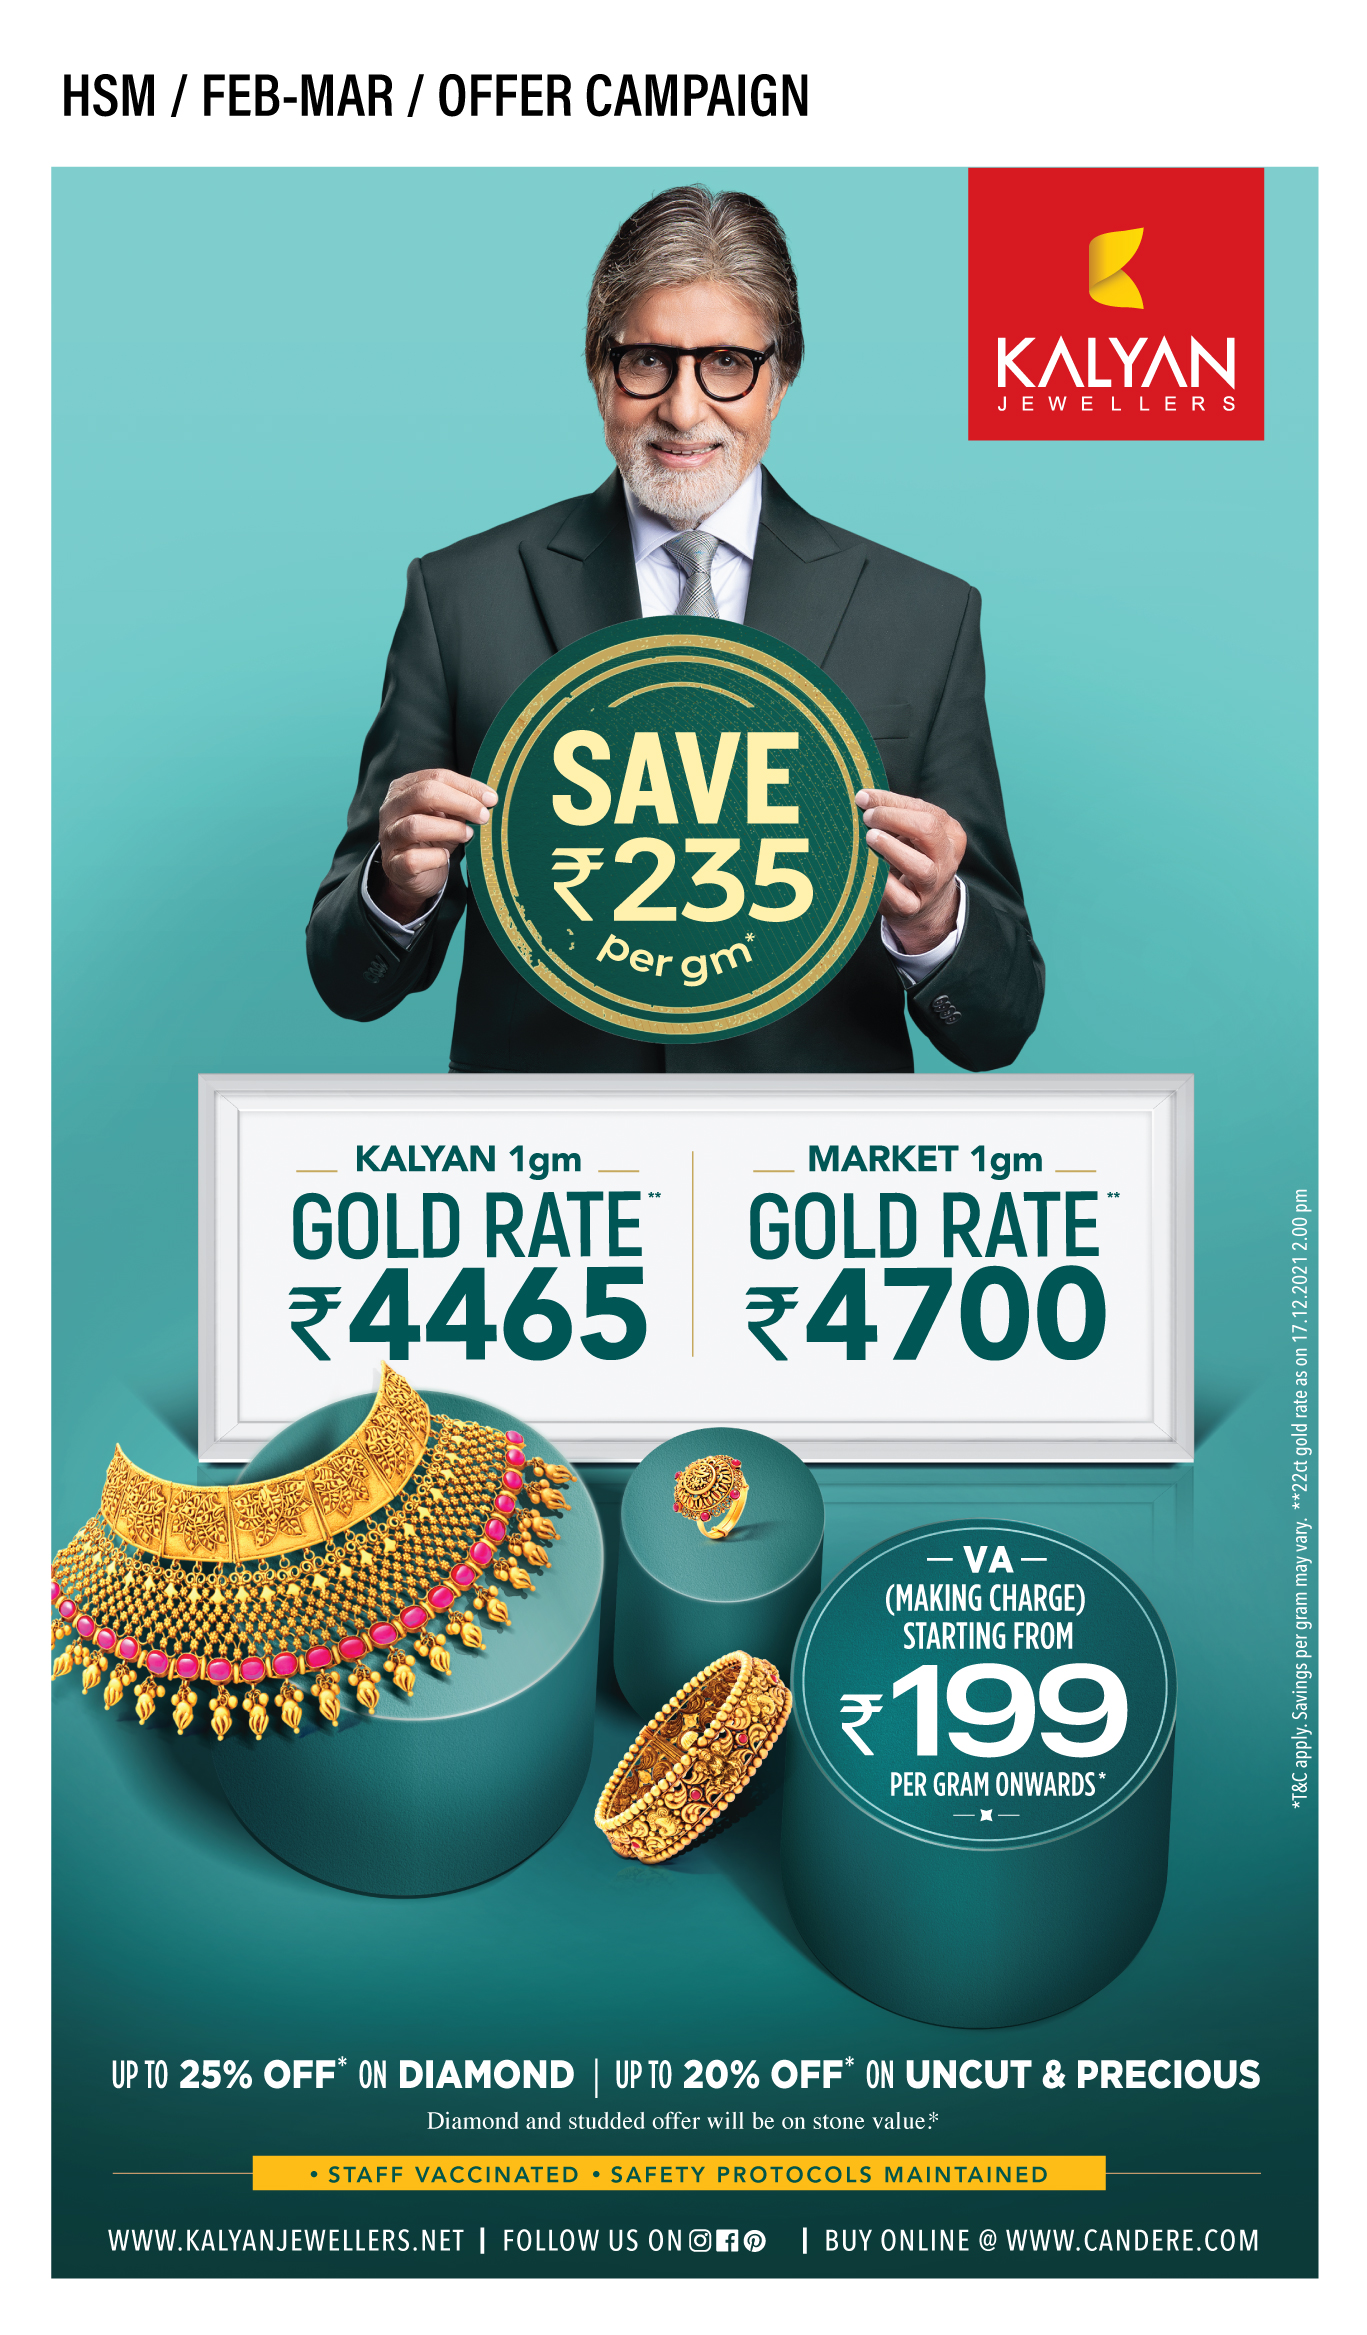 kalyan-jewellers-introduces-special-gold-rate-offer-for-patrons